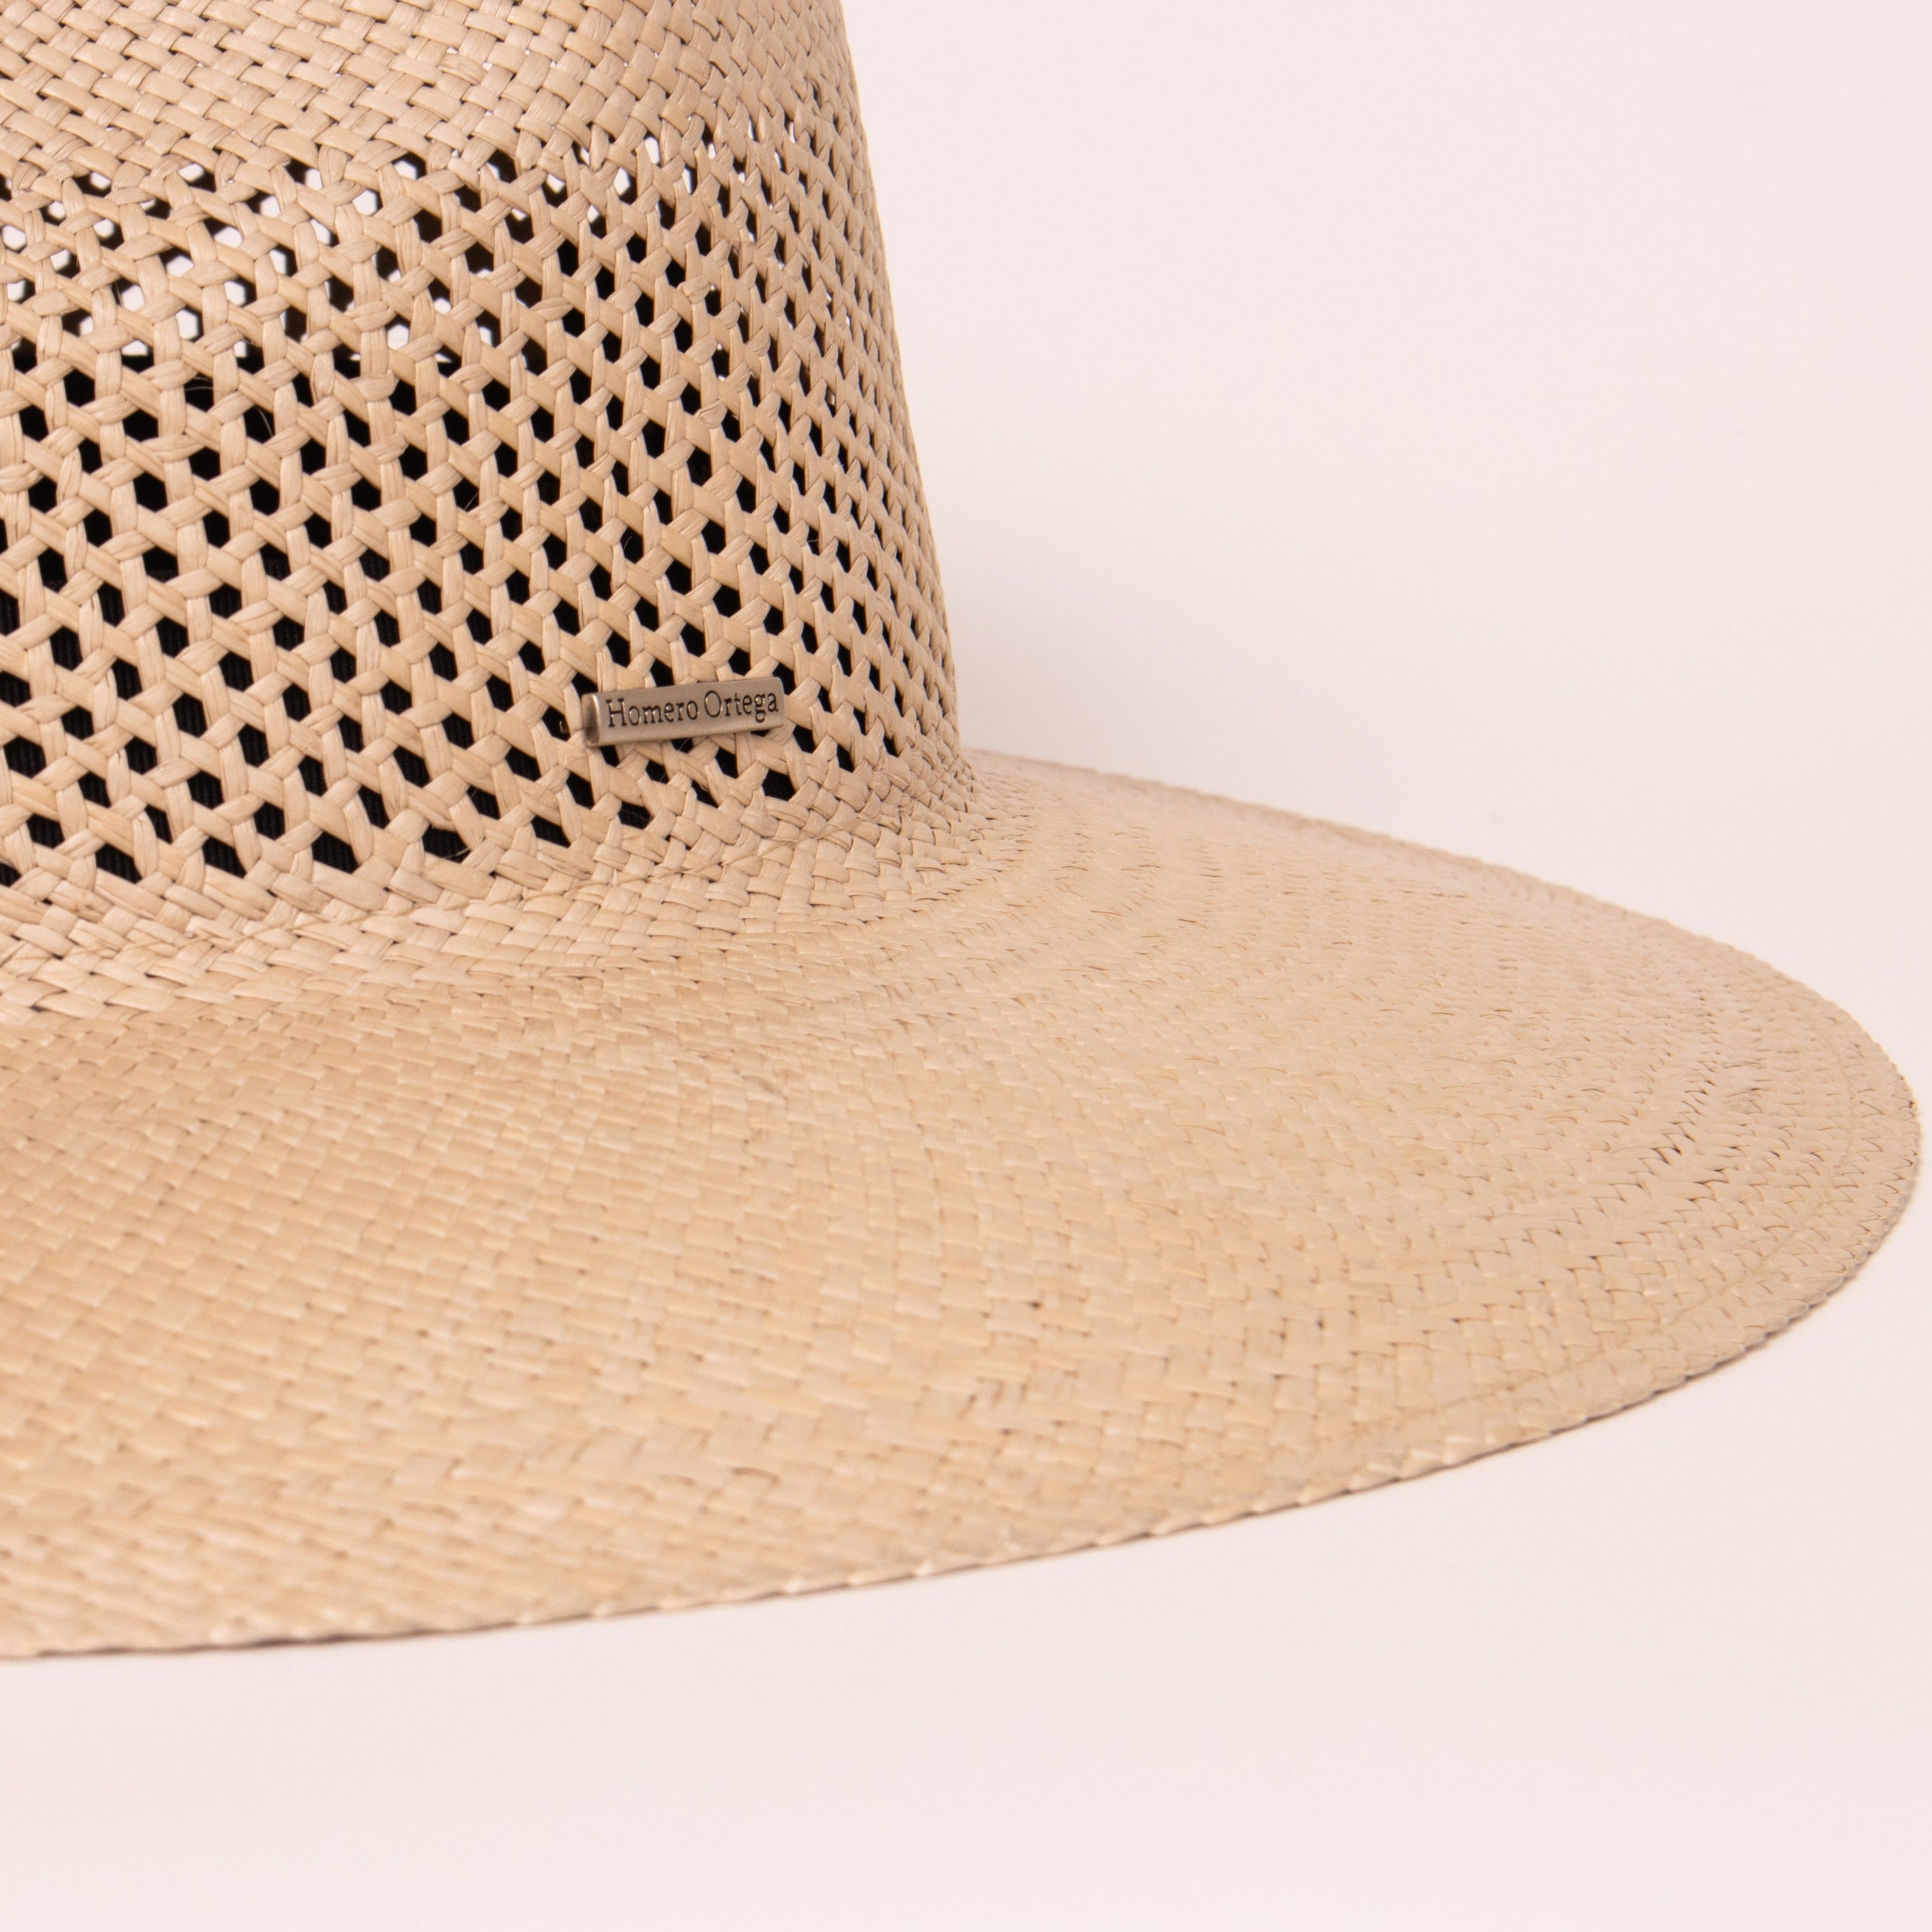 best quality summer hats in melbourne